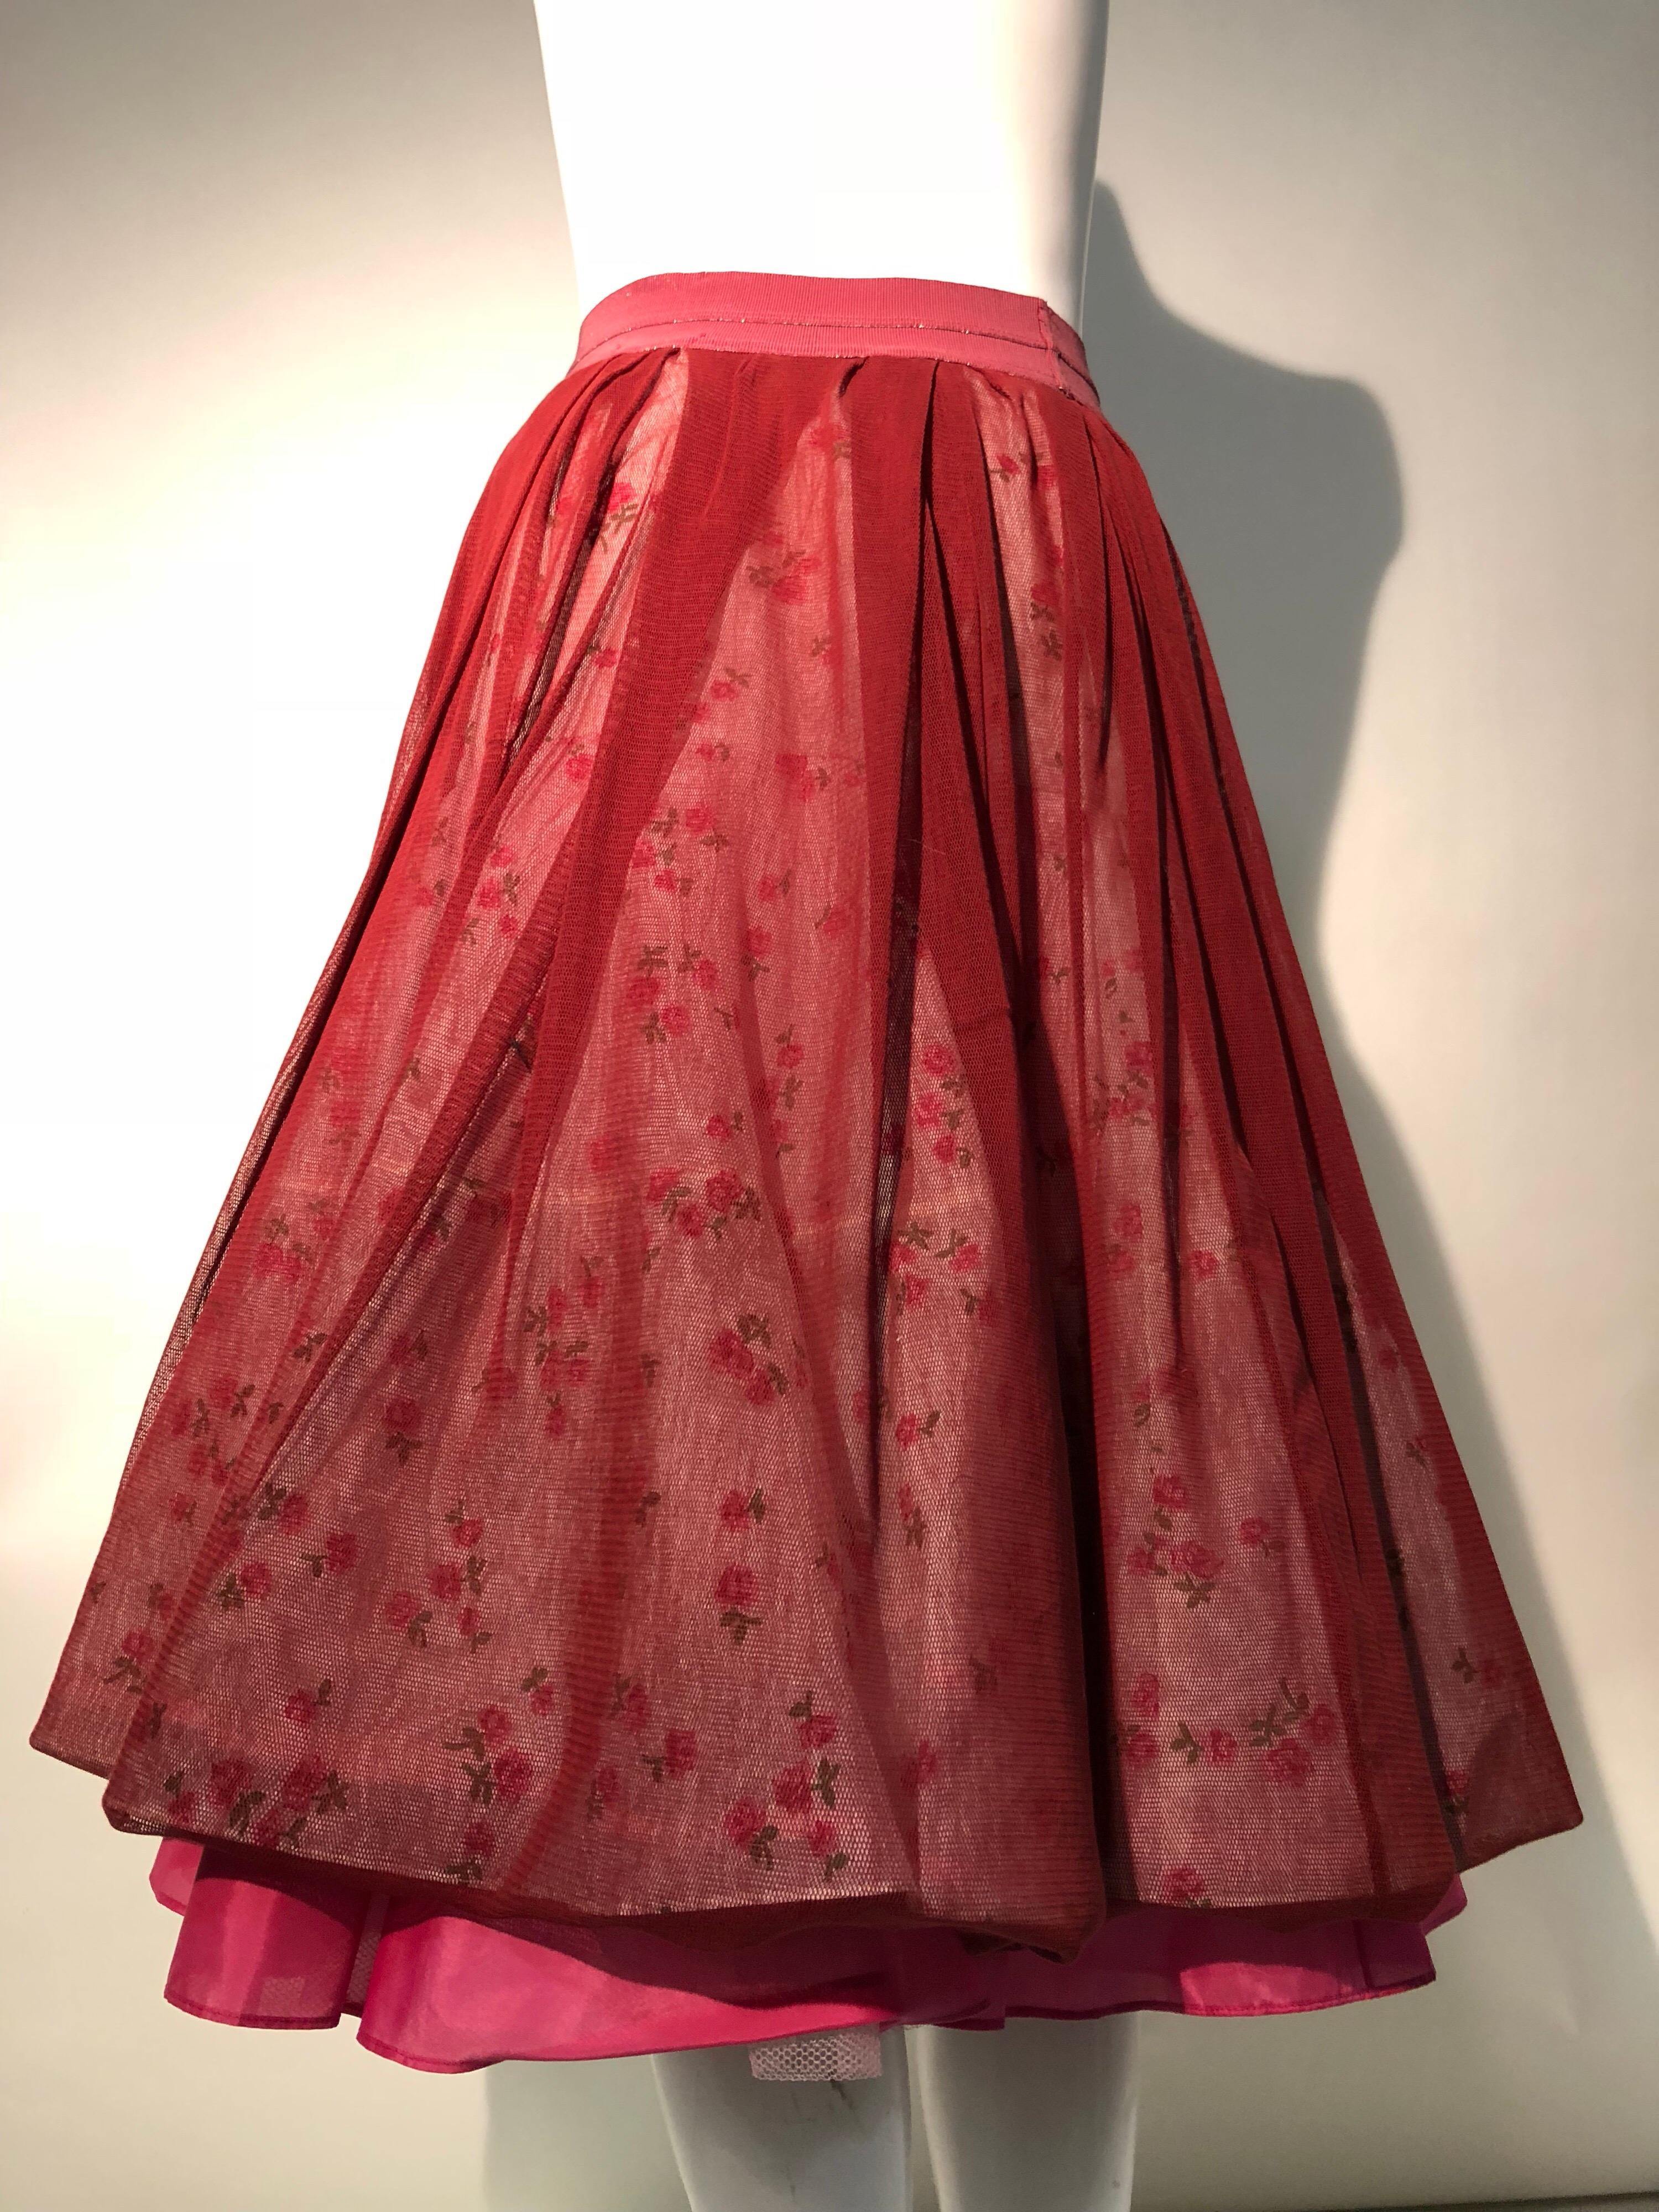 Torso Creations Reconstructed Multi-Layered Petticoat Skirt In Burgundy & Floral 2